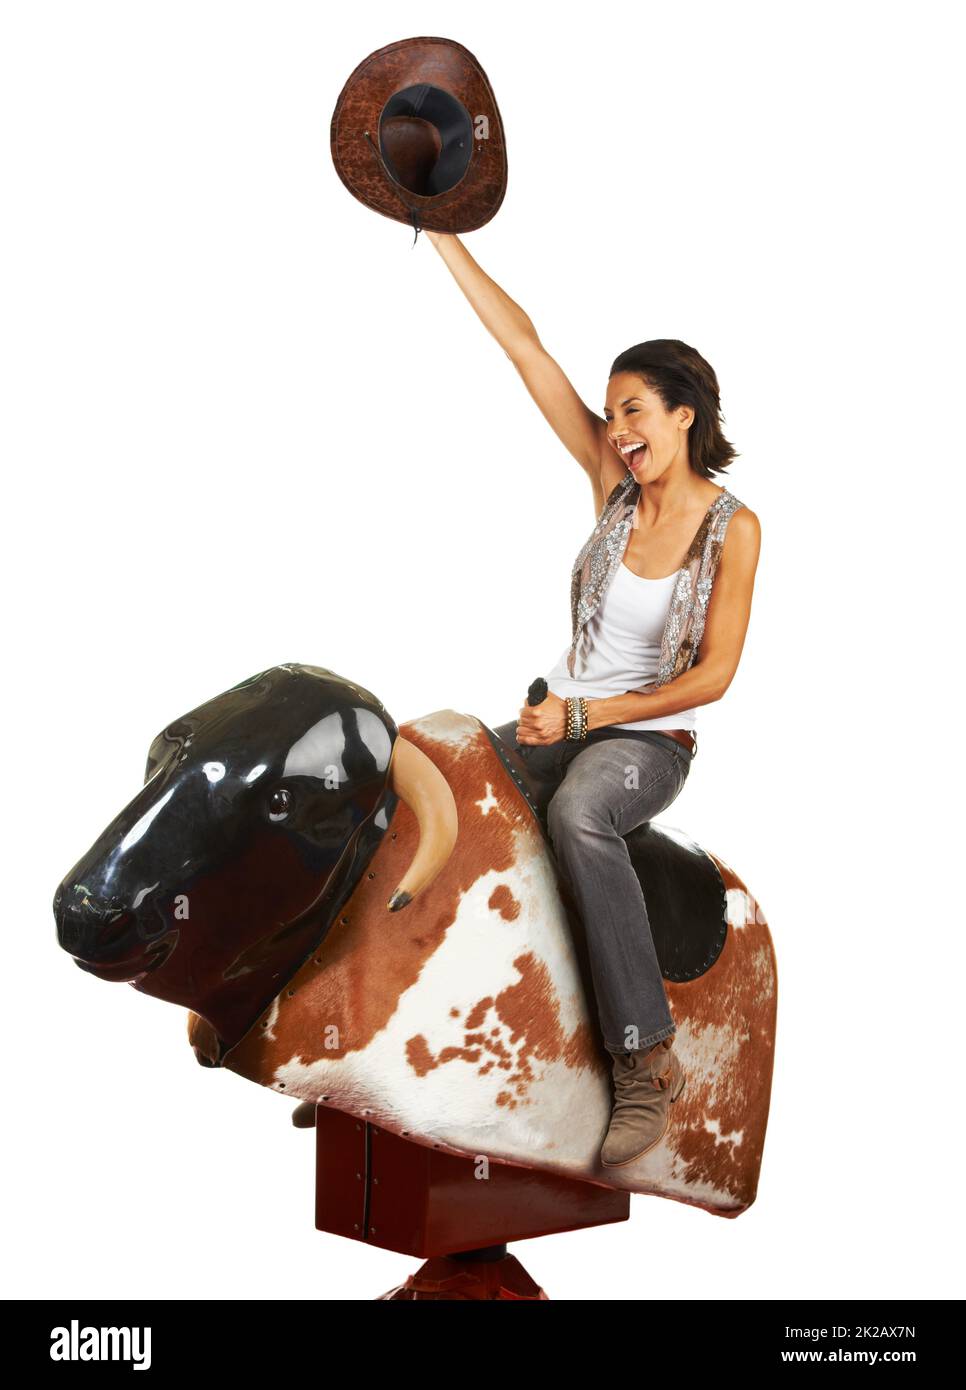 Yeehaw. Studio shot of a beautiful young woman riding a mechanical bull against a white background. Stock Photo